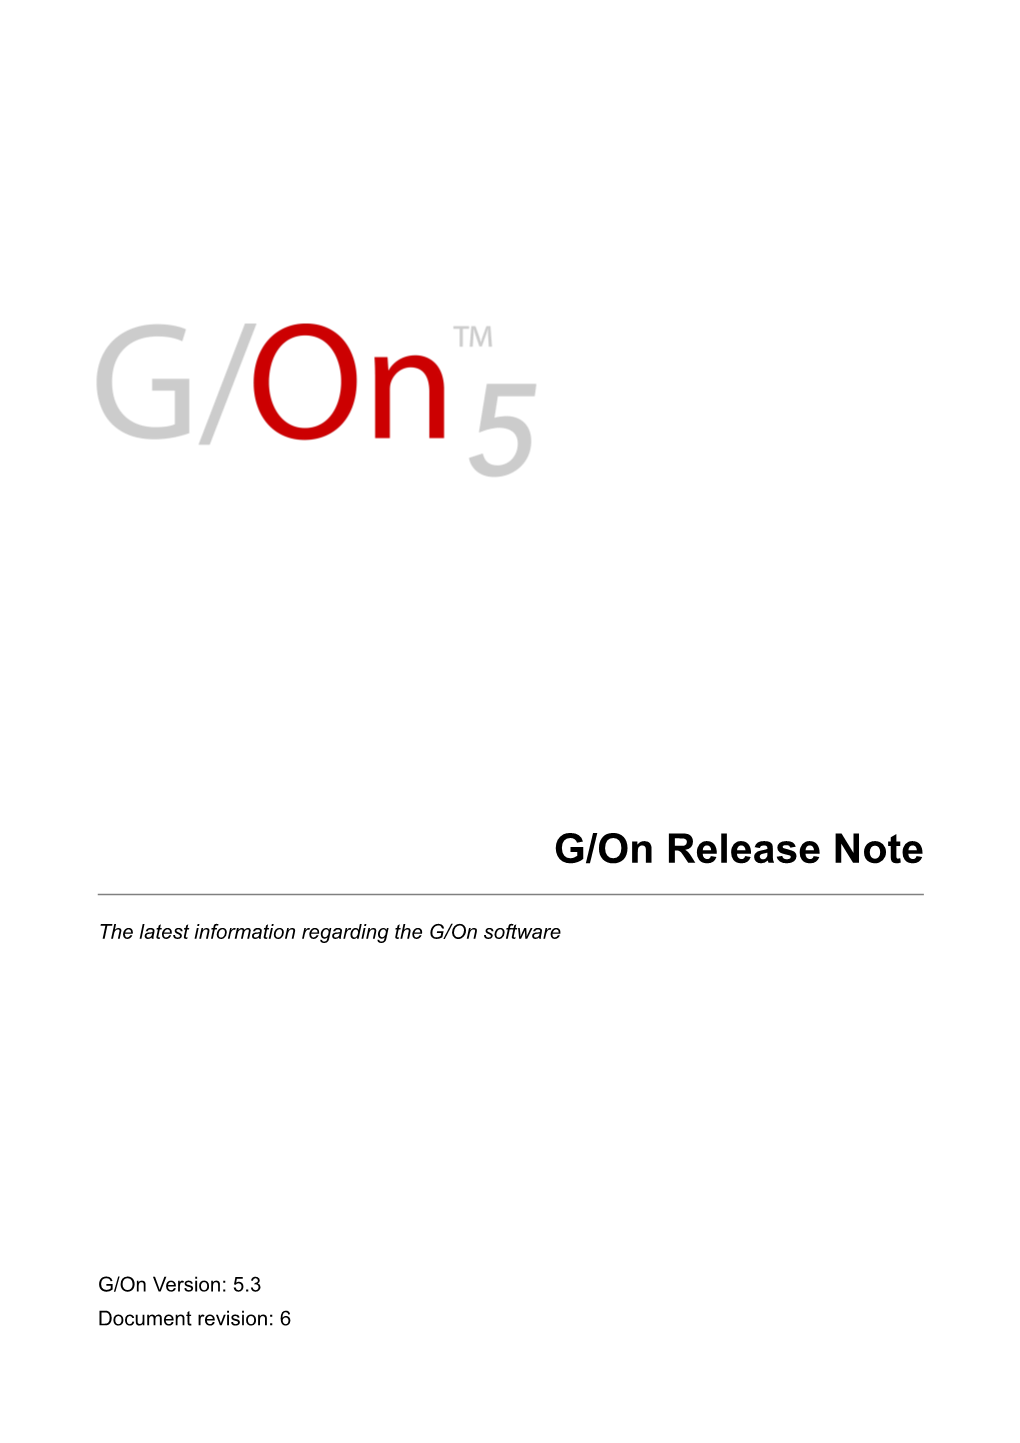 G/On Release Note